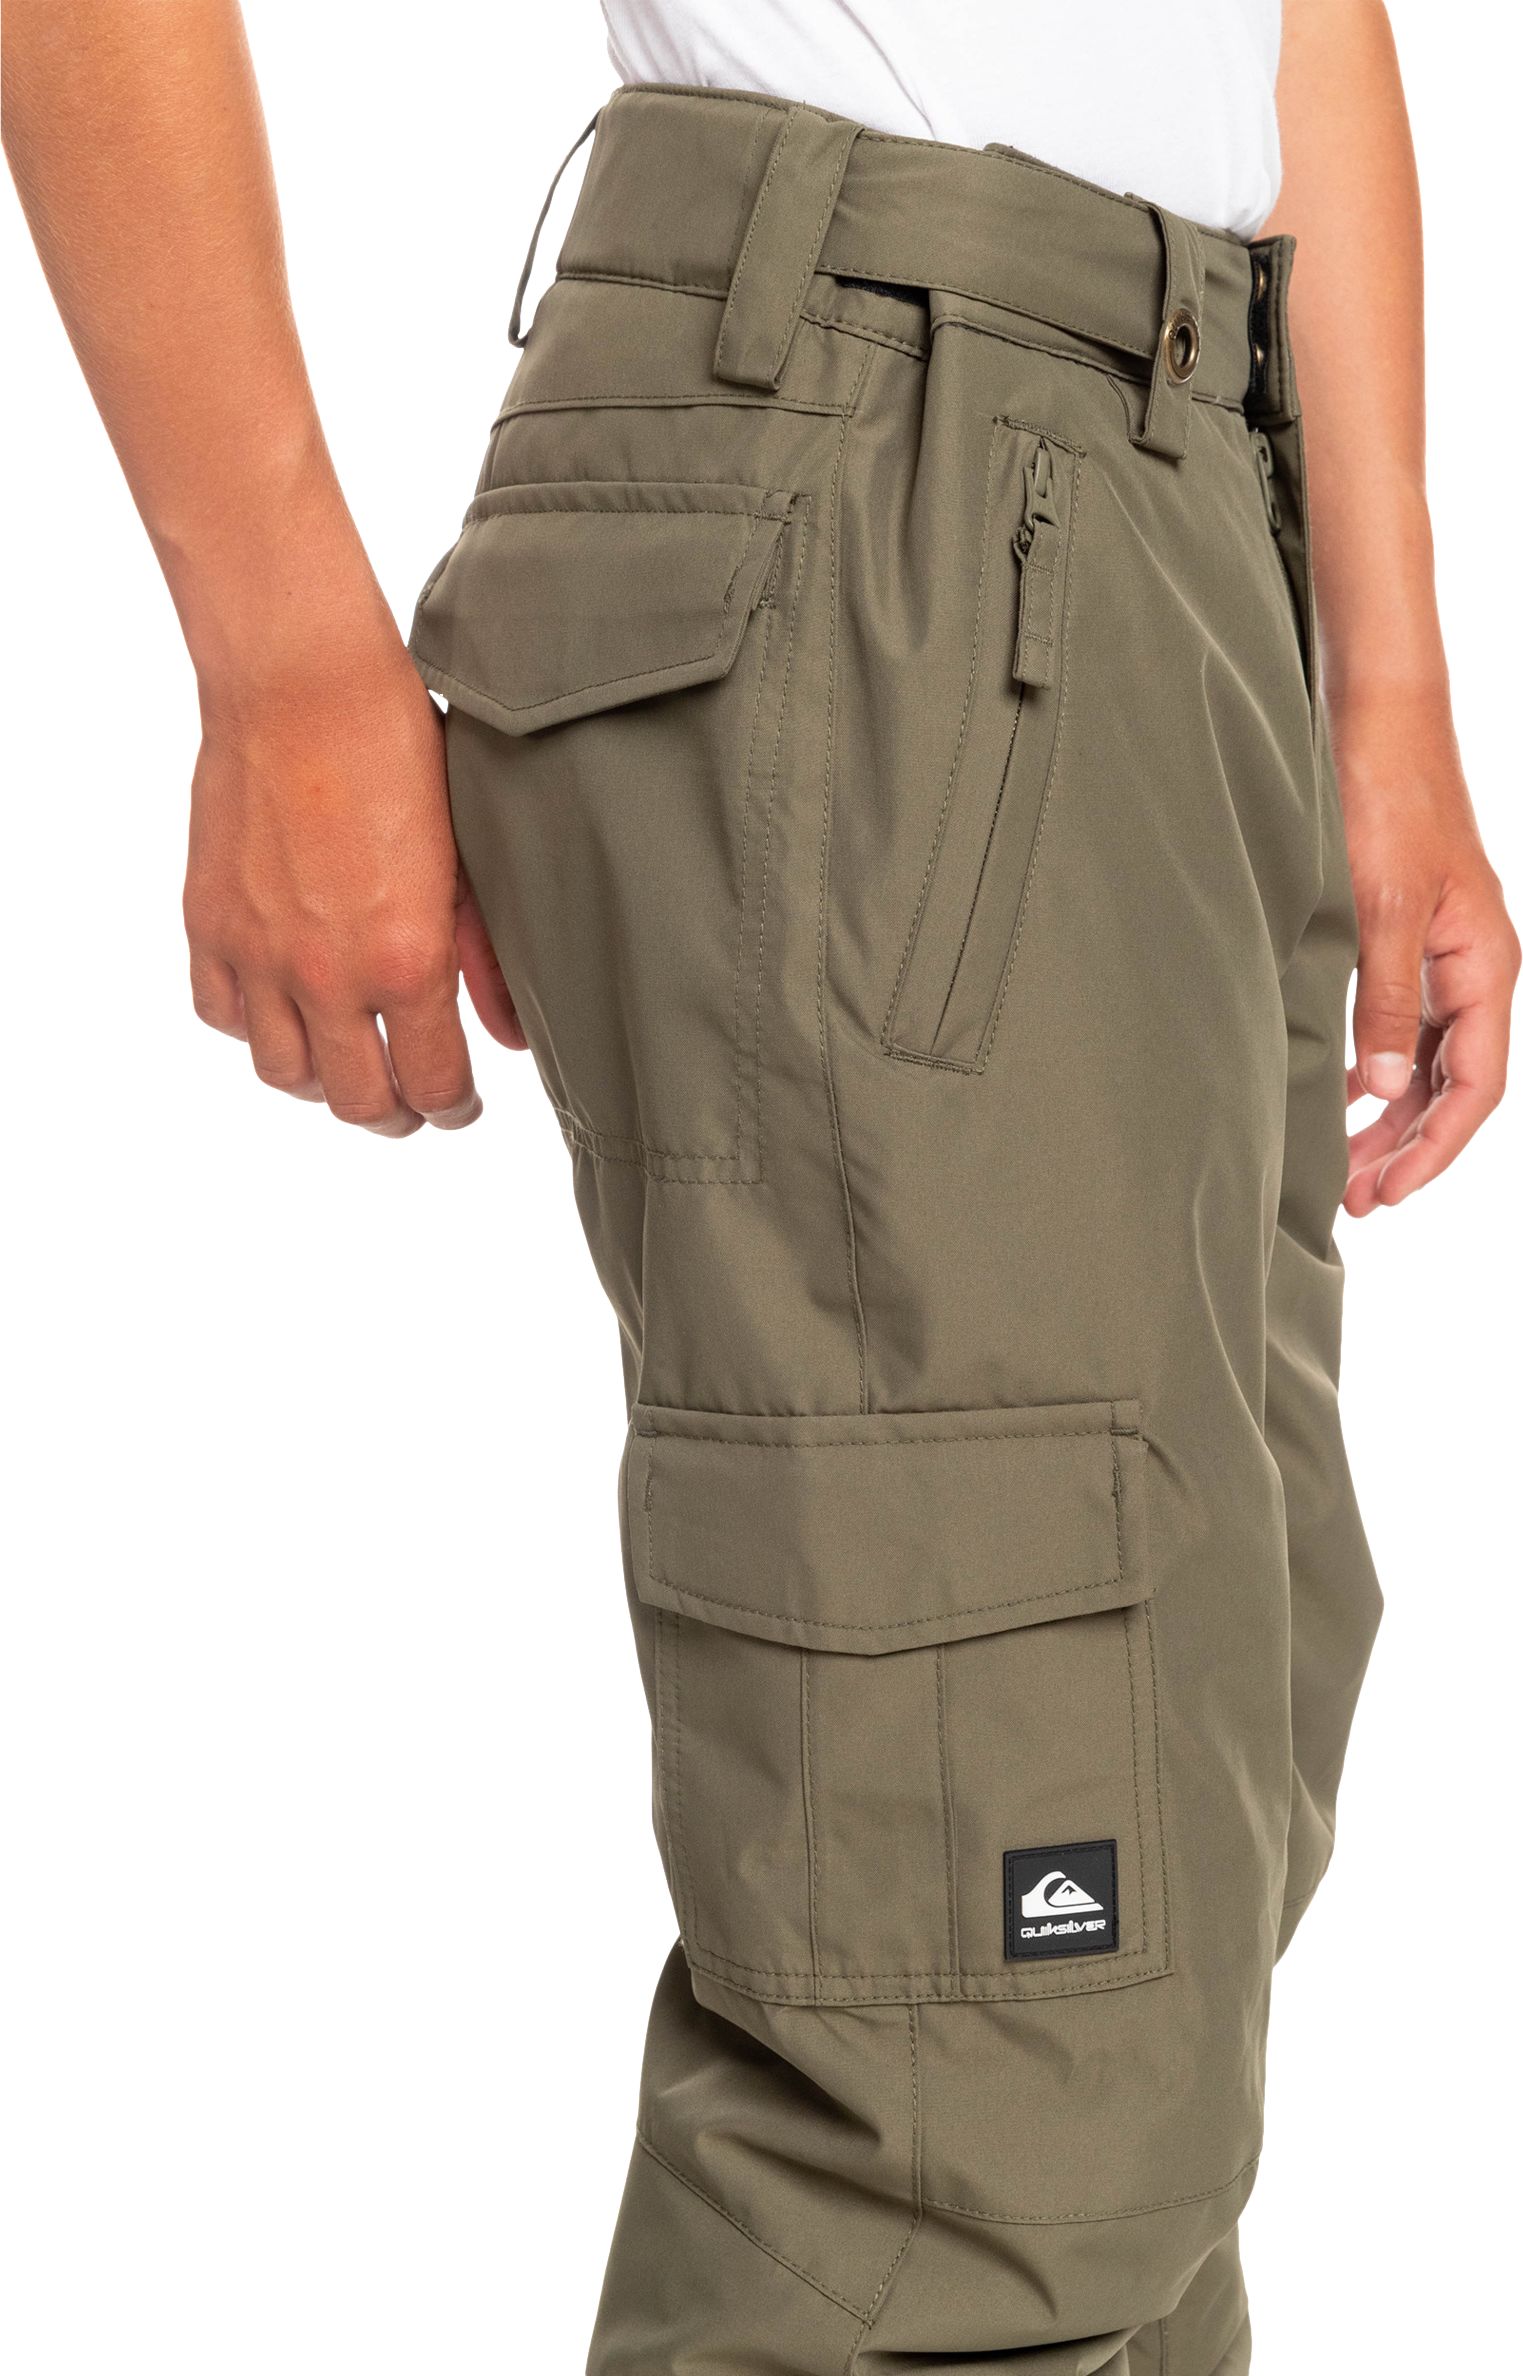 QUIKSILVER, J PORTER YOUTH PANT